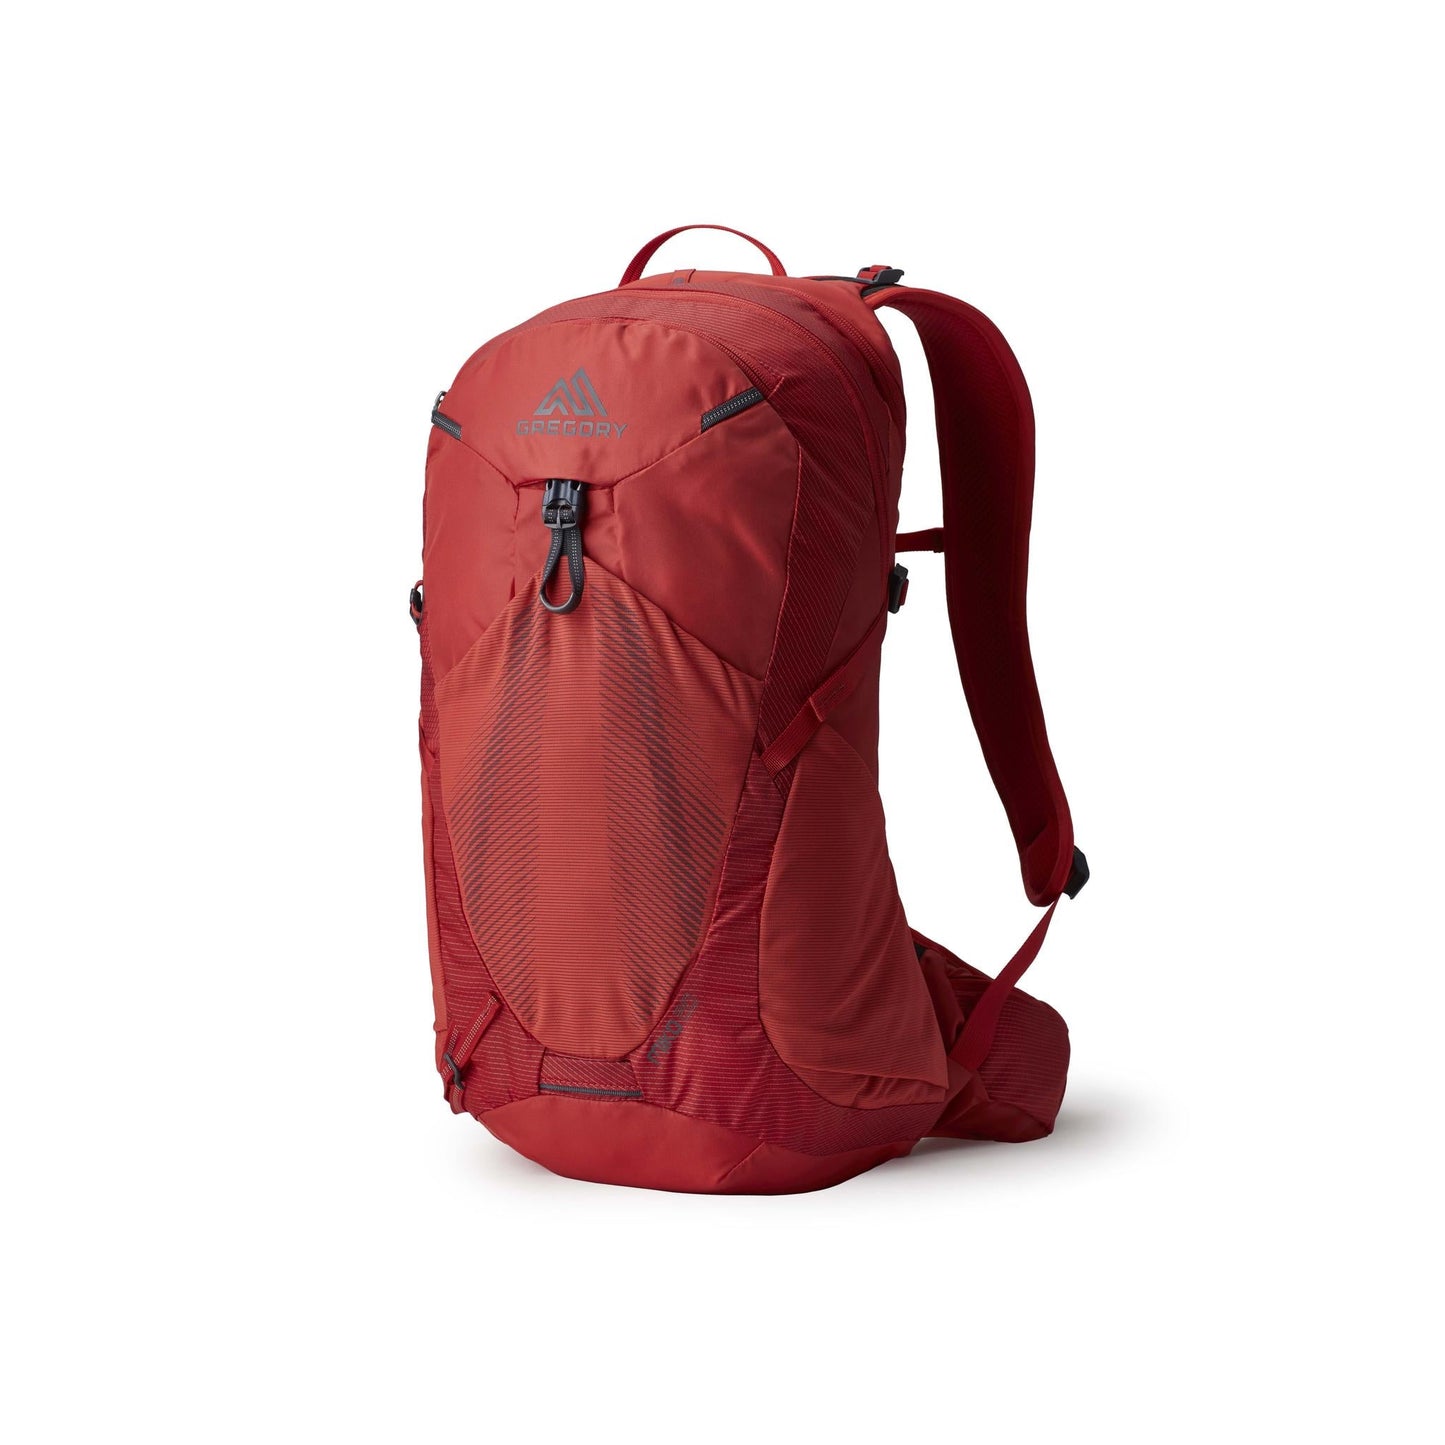 Gregory Miko 20 Backpack